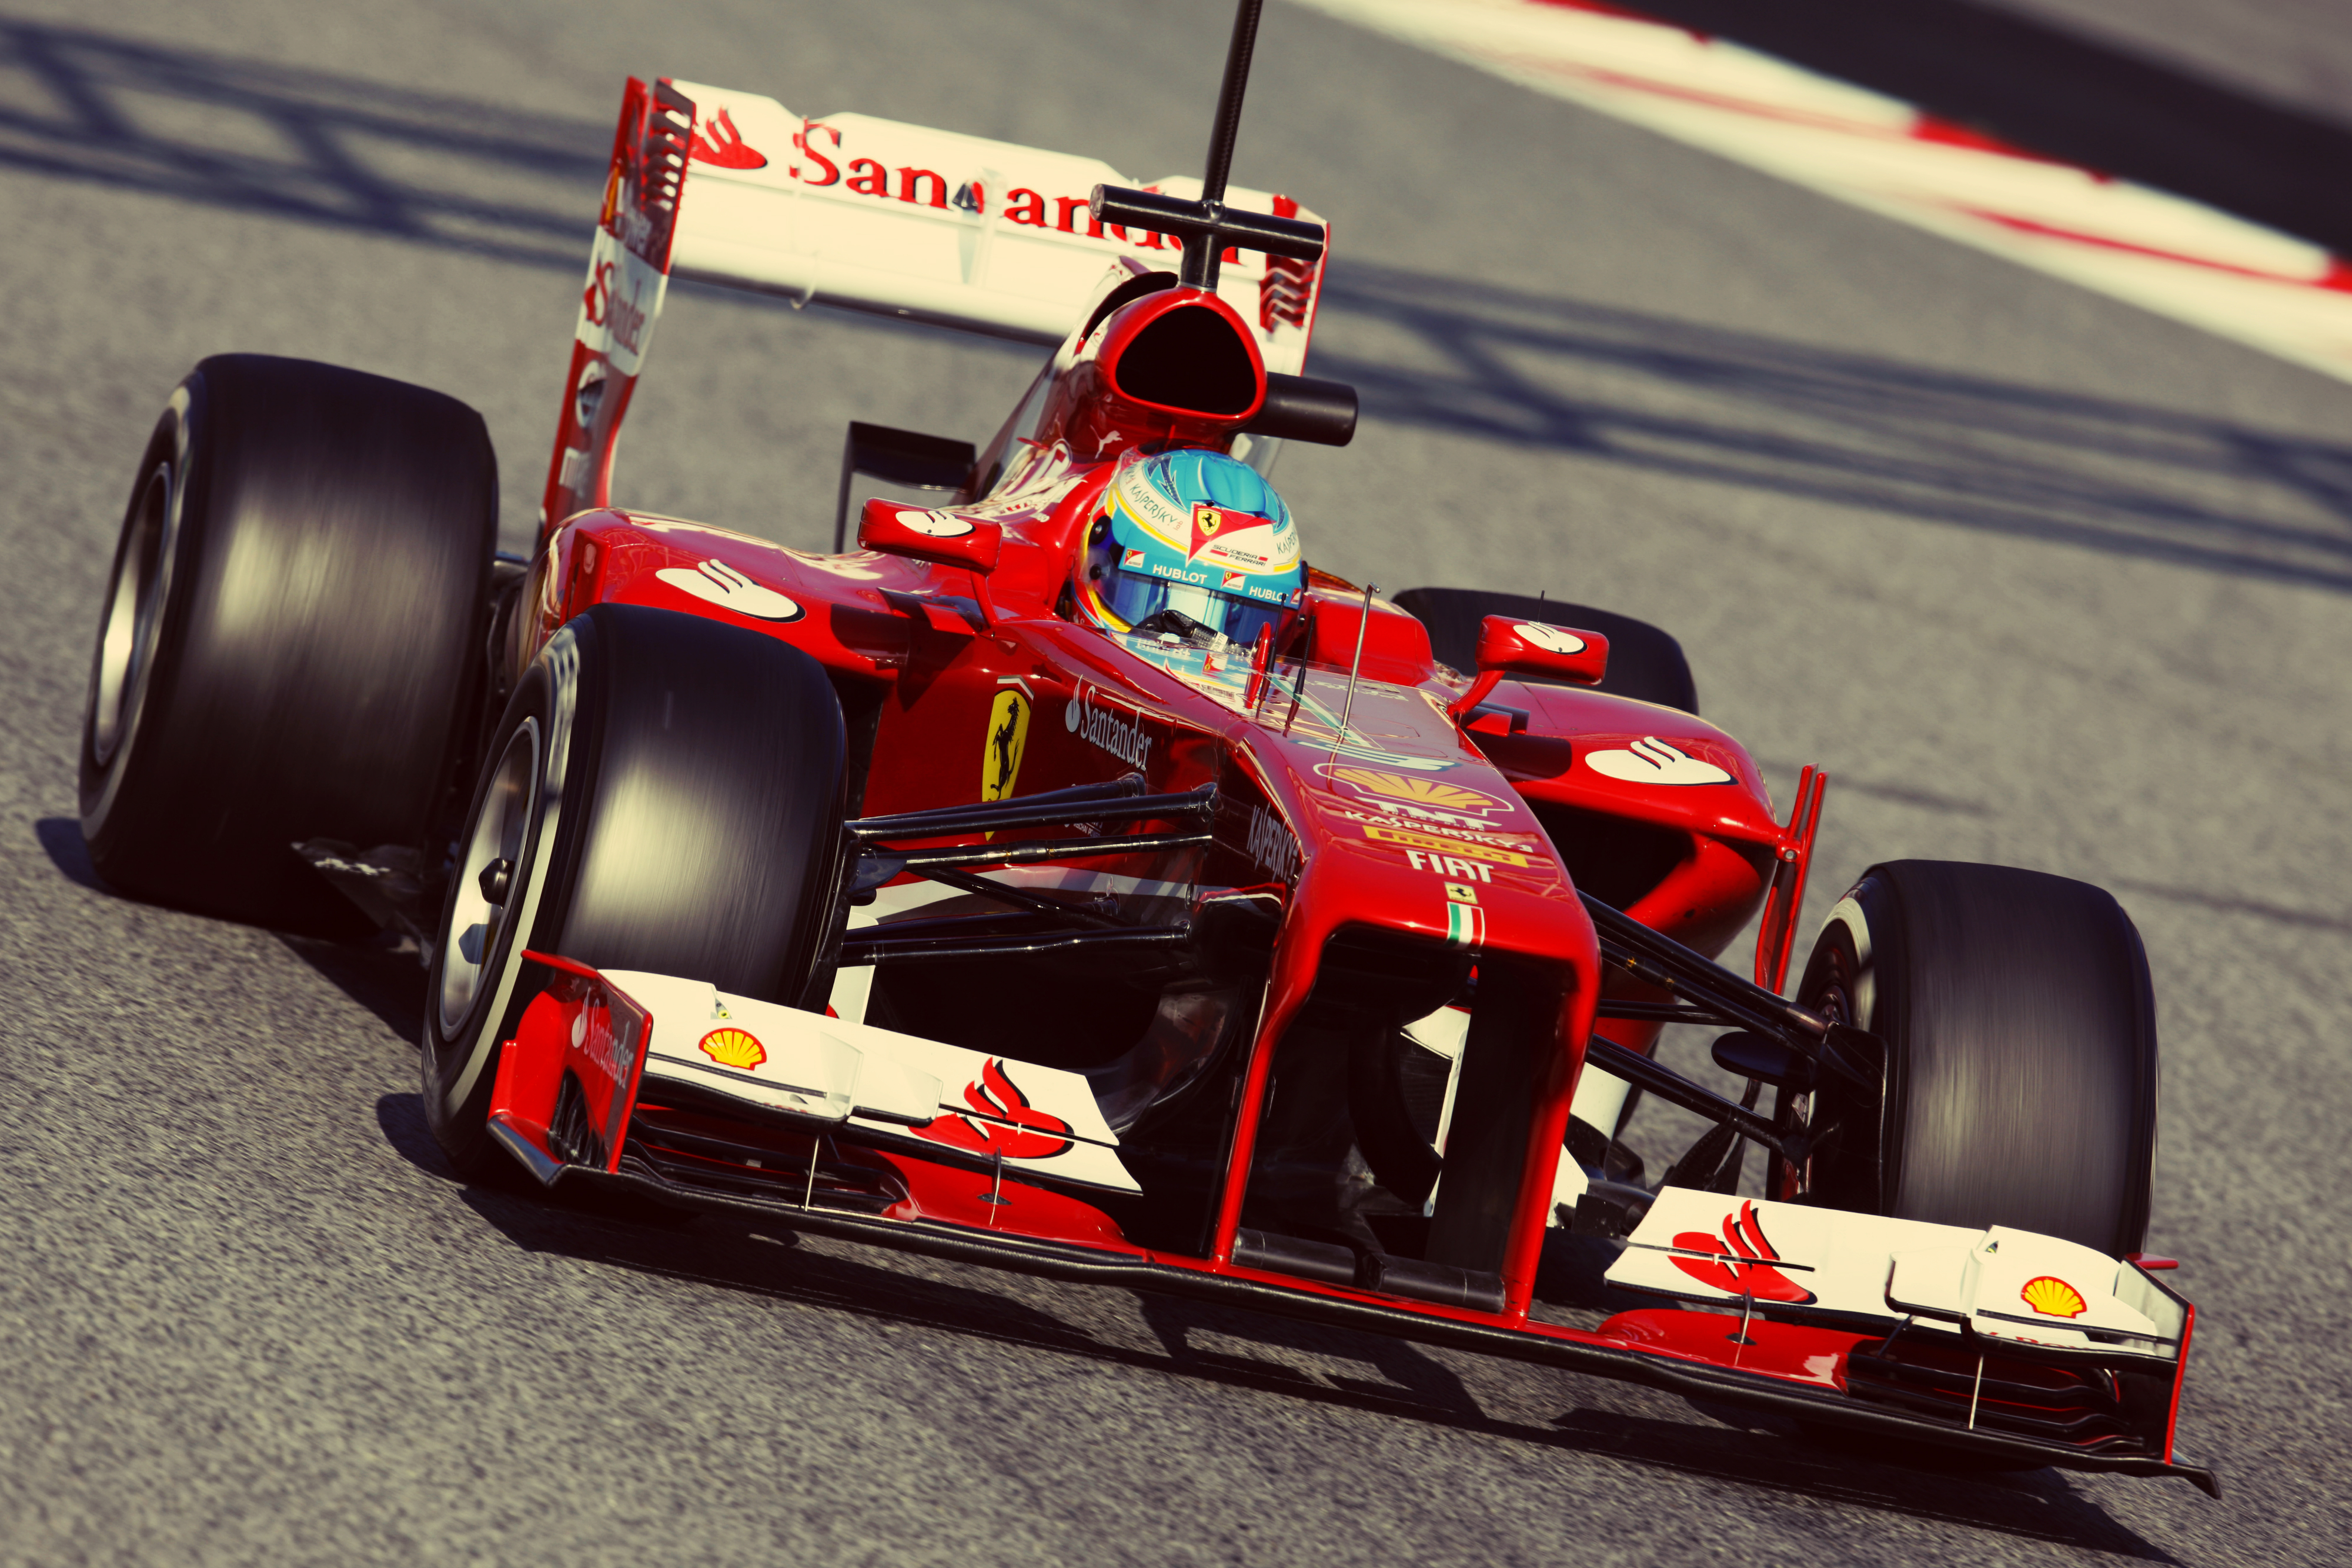 Popular F1 images for mobile phone